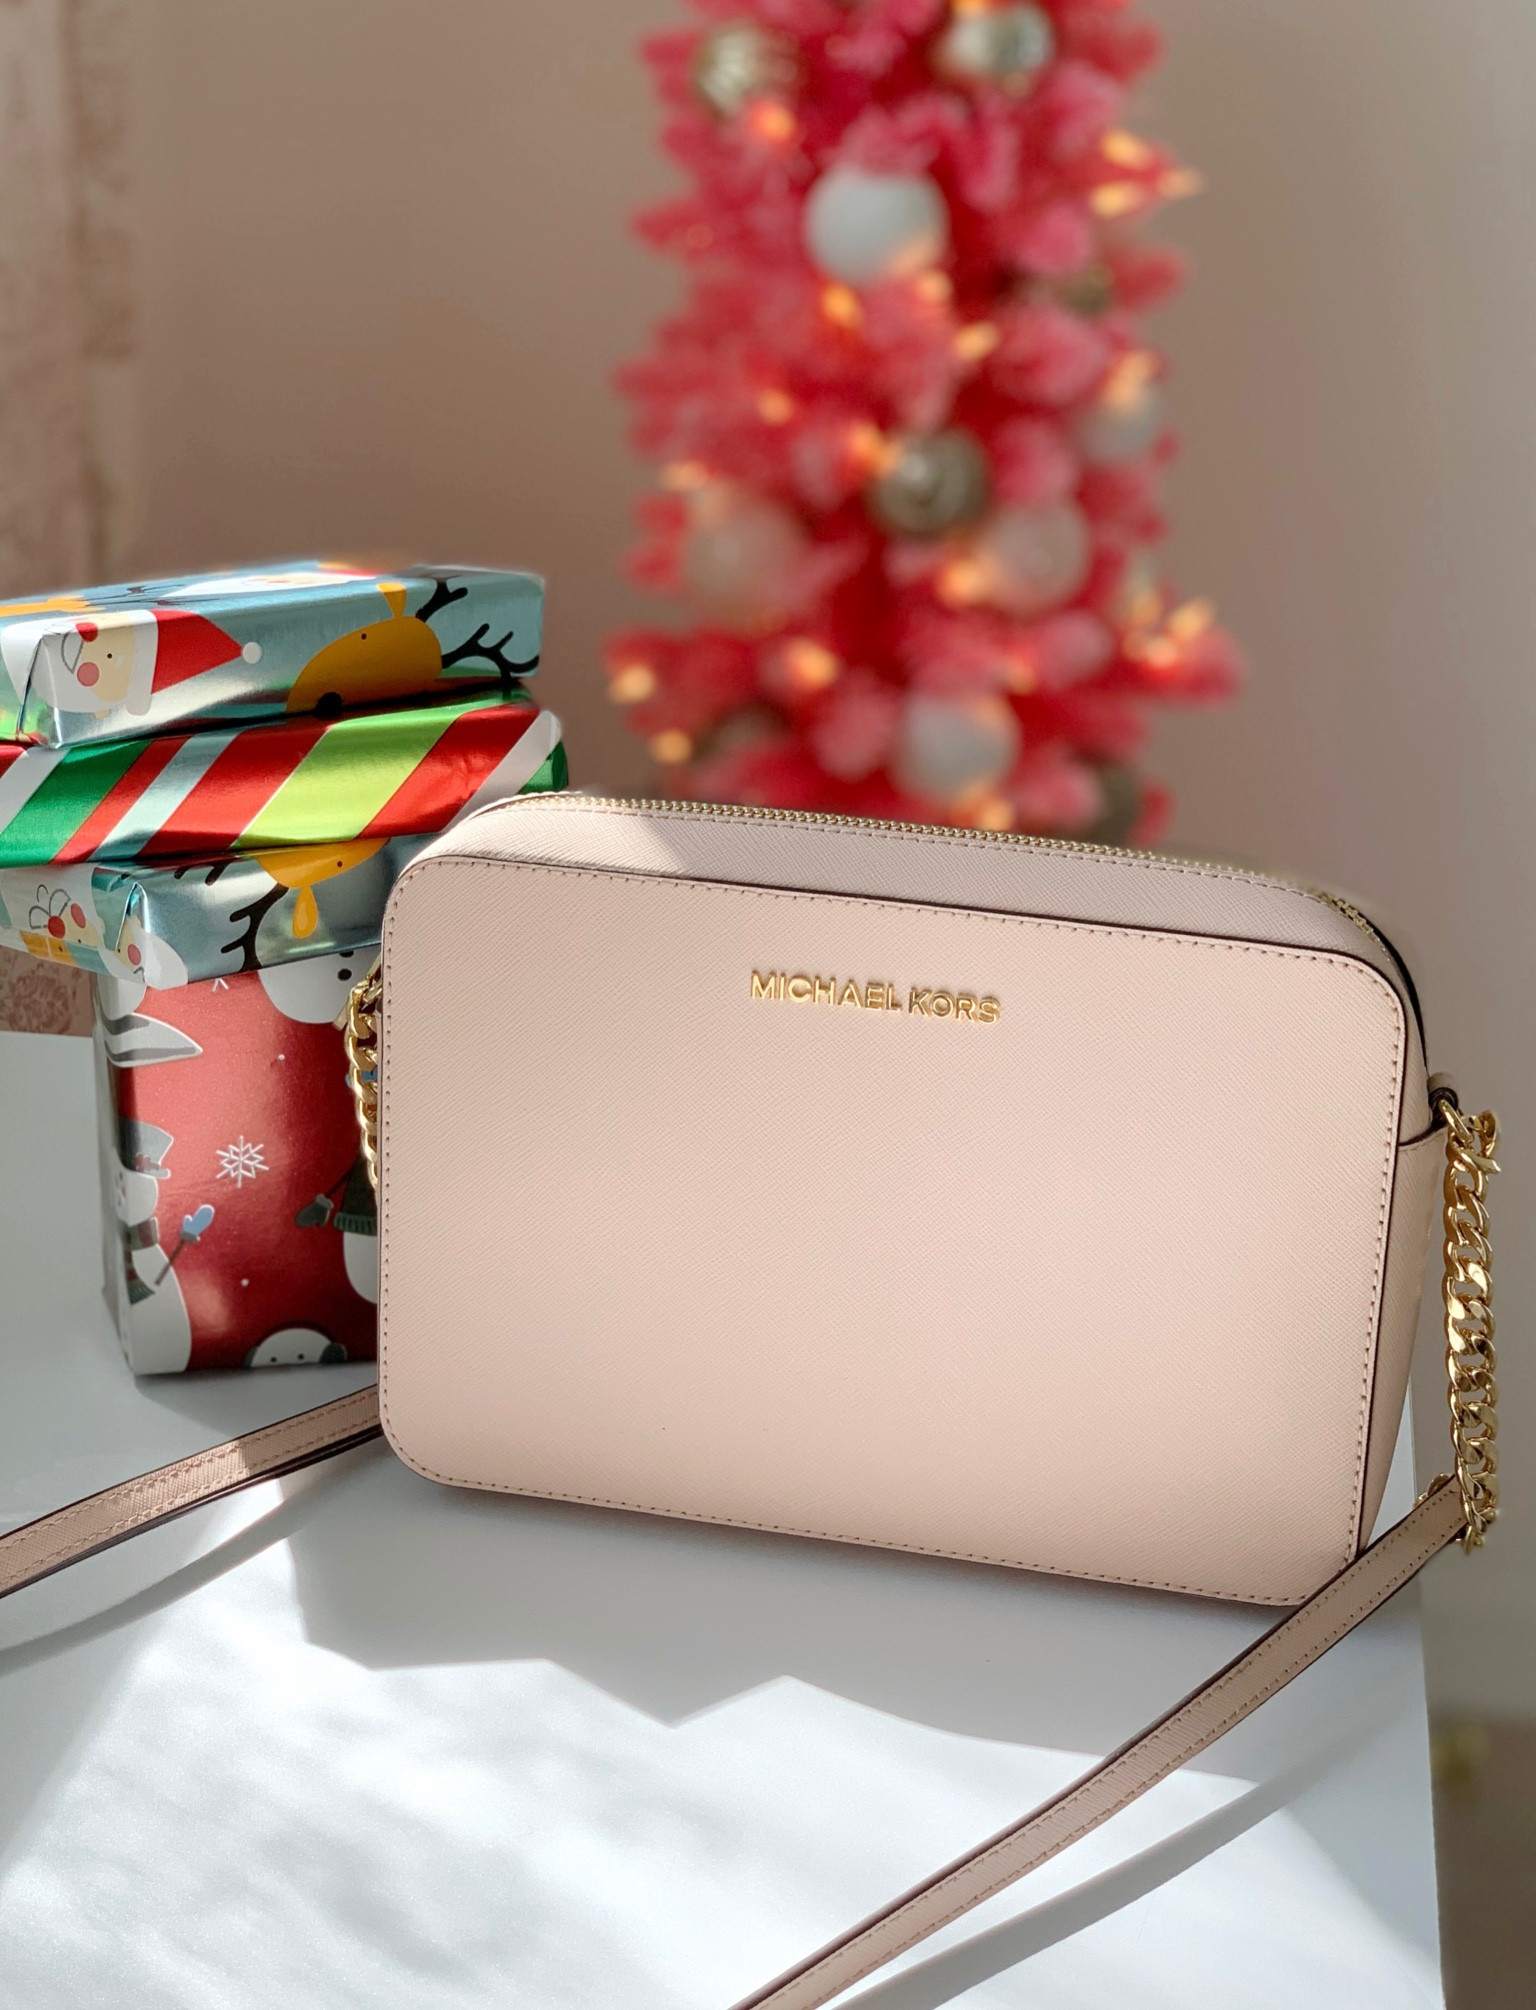 Michael Kors Gifts for the Stylish Jet-Setter in Your Life